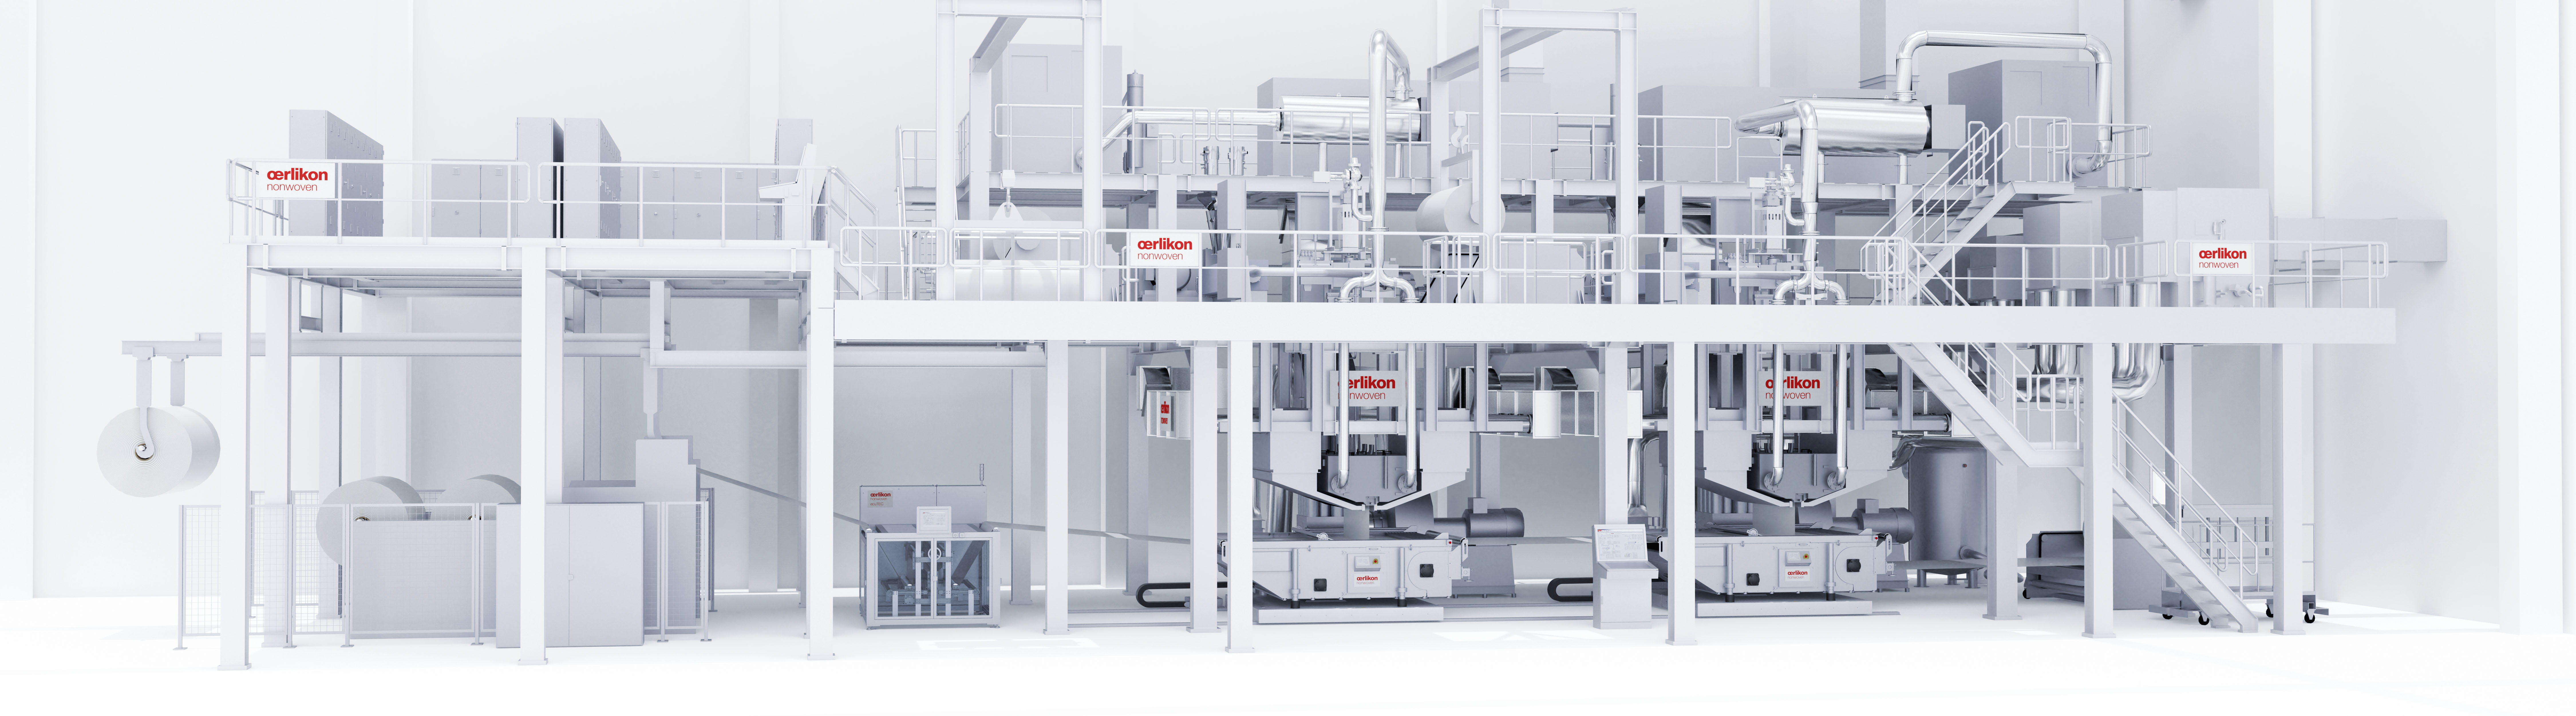 Oerlikon Nonwoven double-beam meltblown system – here with integrated ecuTEC+ for electrostatically-charging the filter media. © Oerlikon.